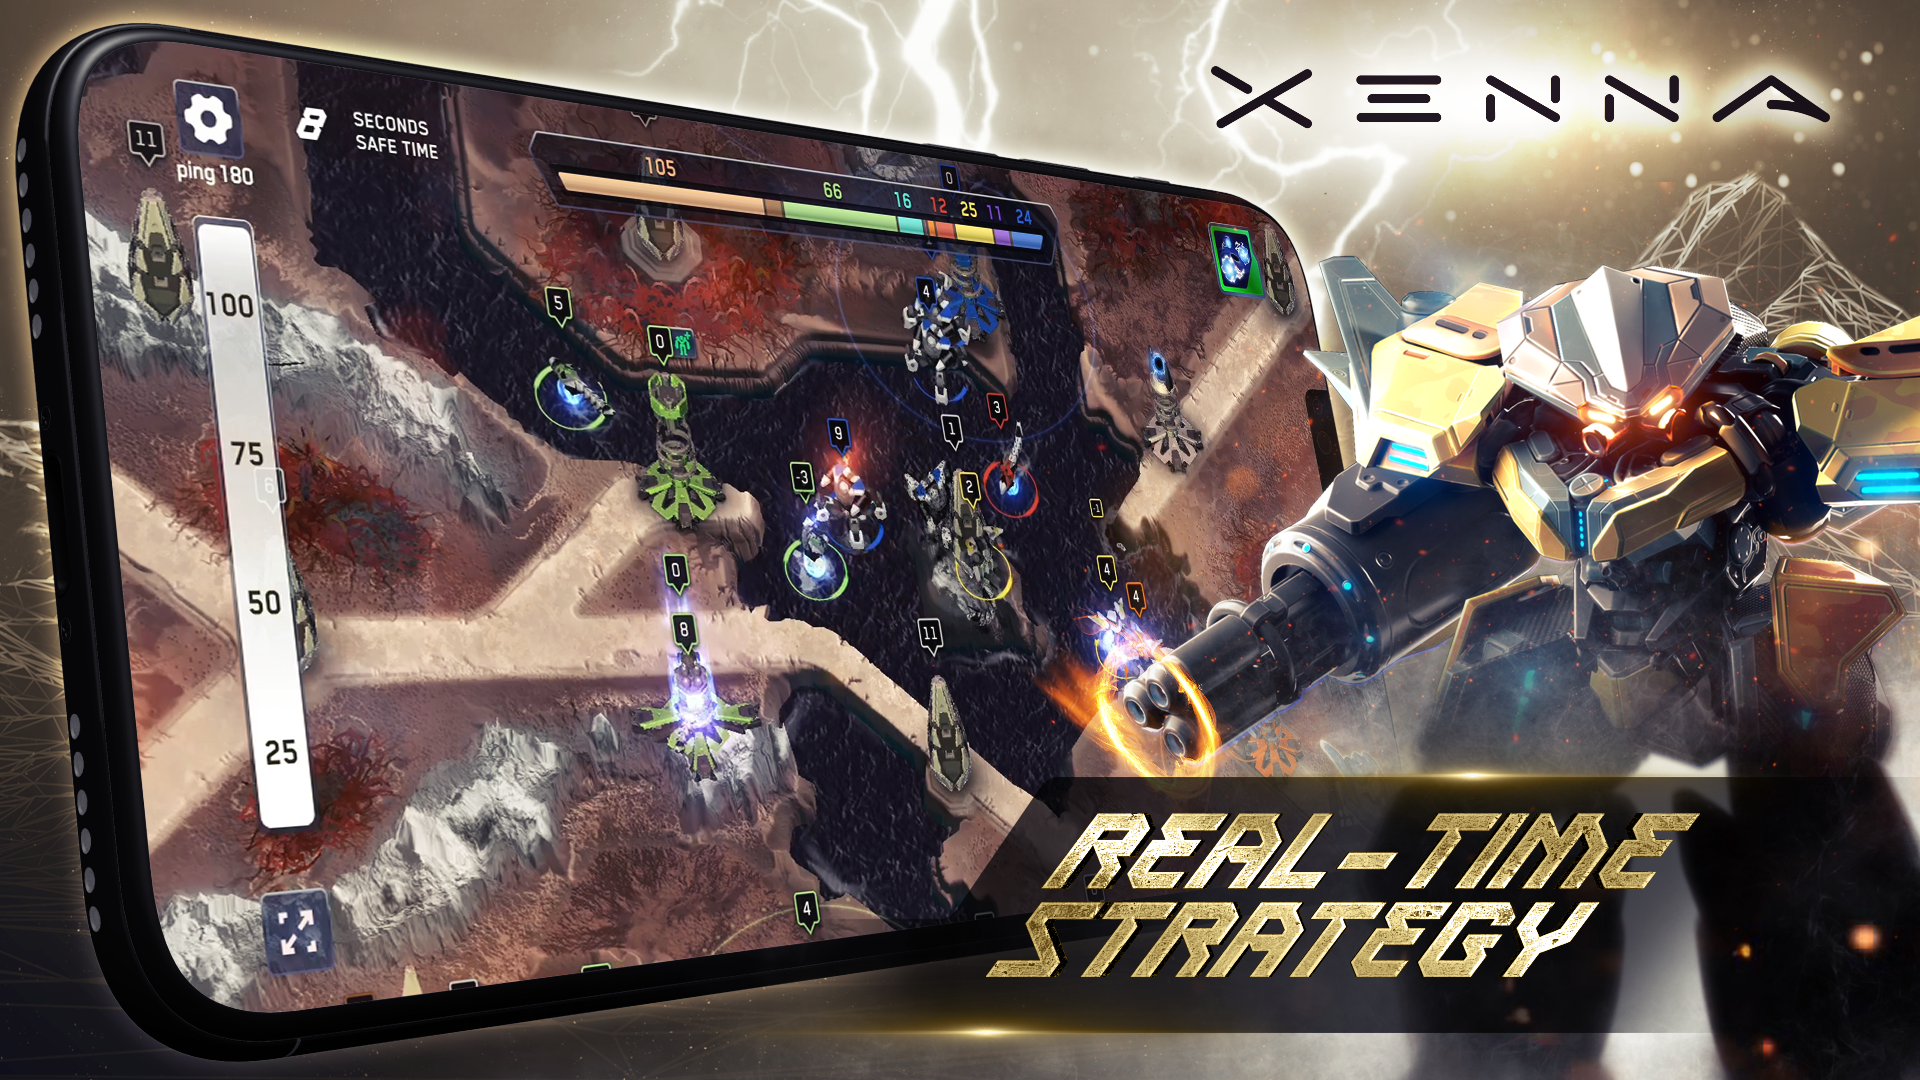 Screenshot 1 of XENNA - MMO Real-time strategy 0.21.0.22